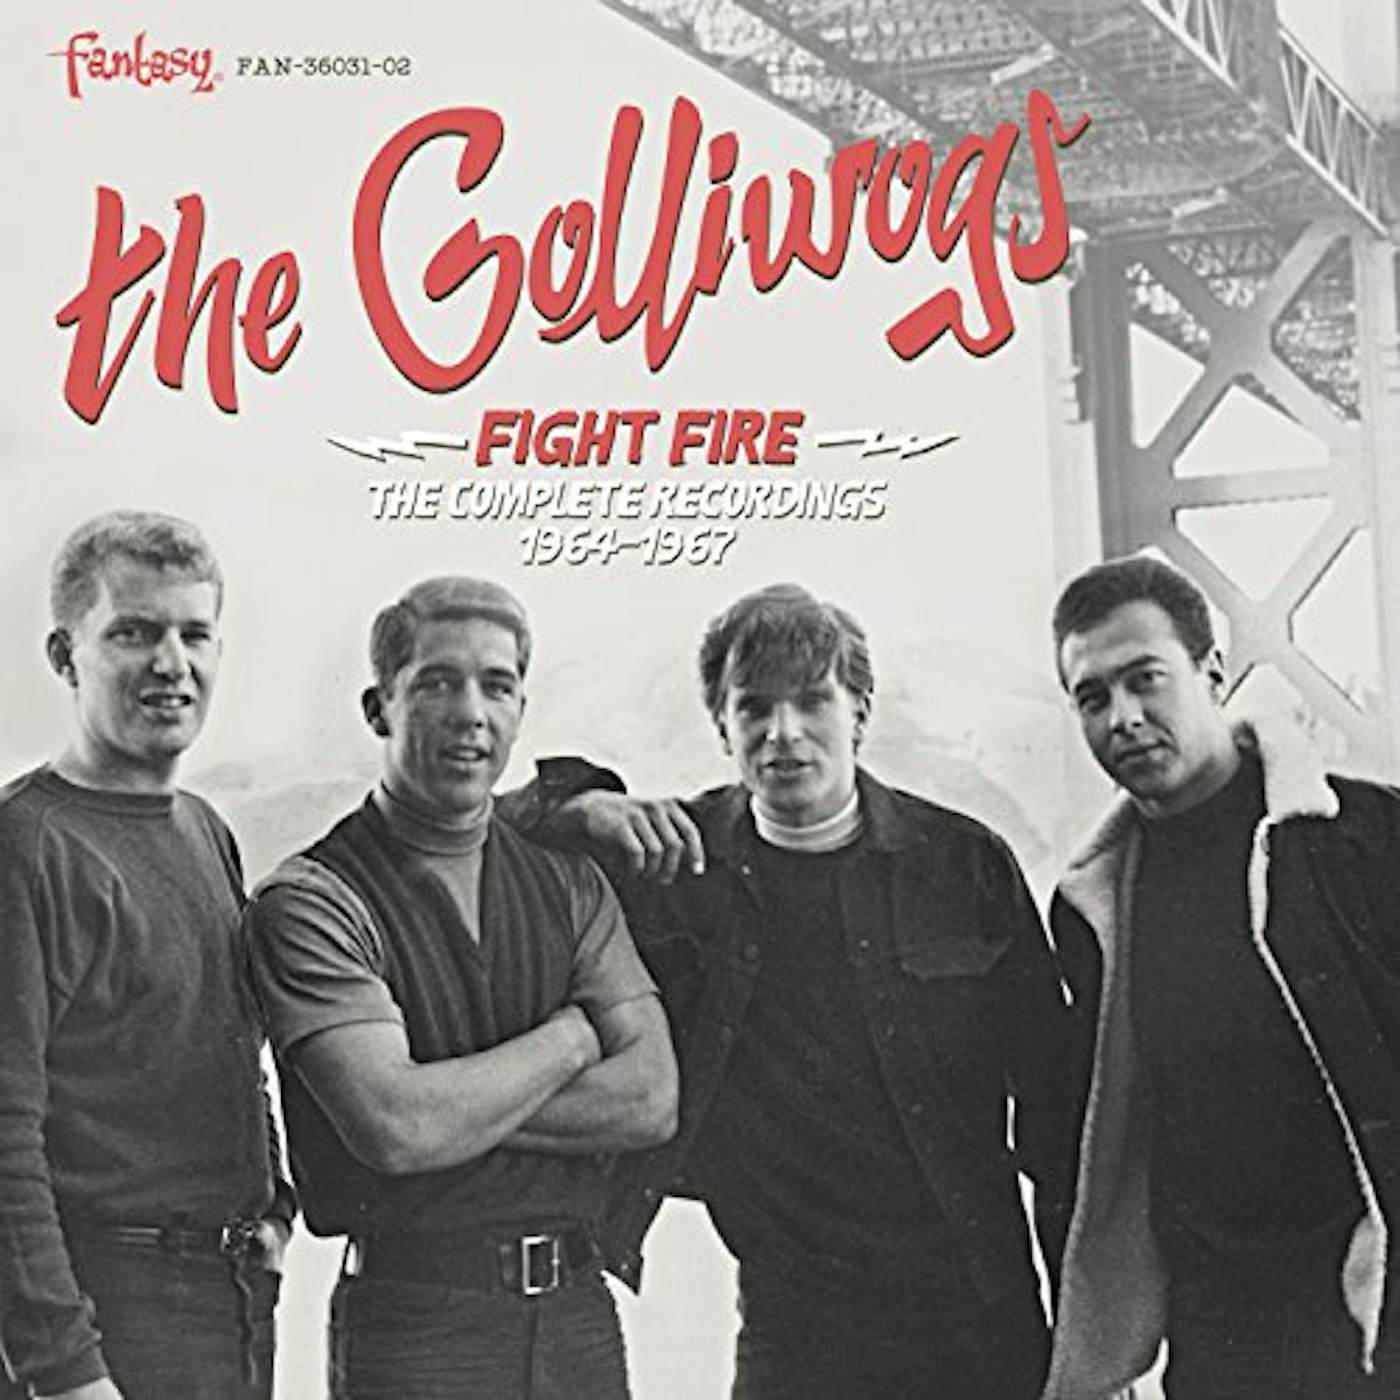 The Golliwogs Fight Fire: The Complete Recordings 1964-1967 Vinyl Record